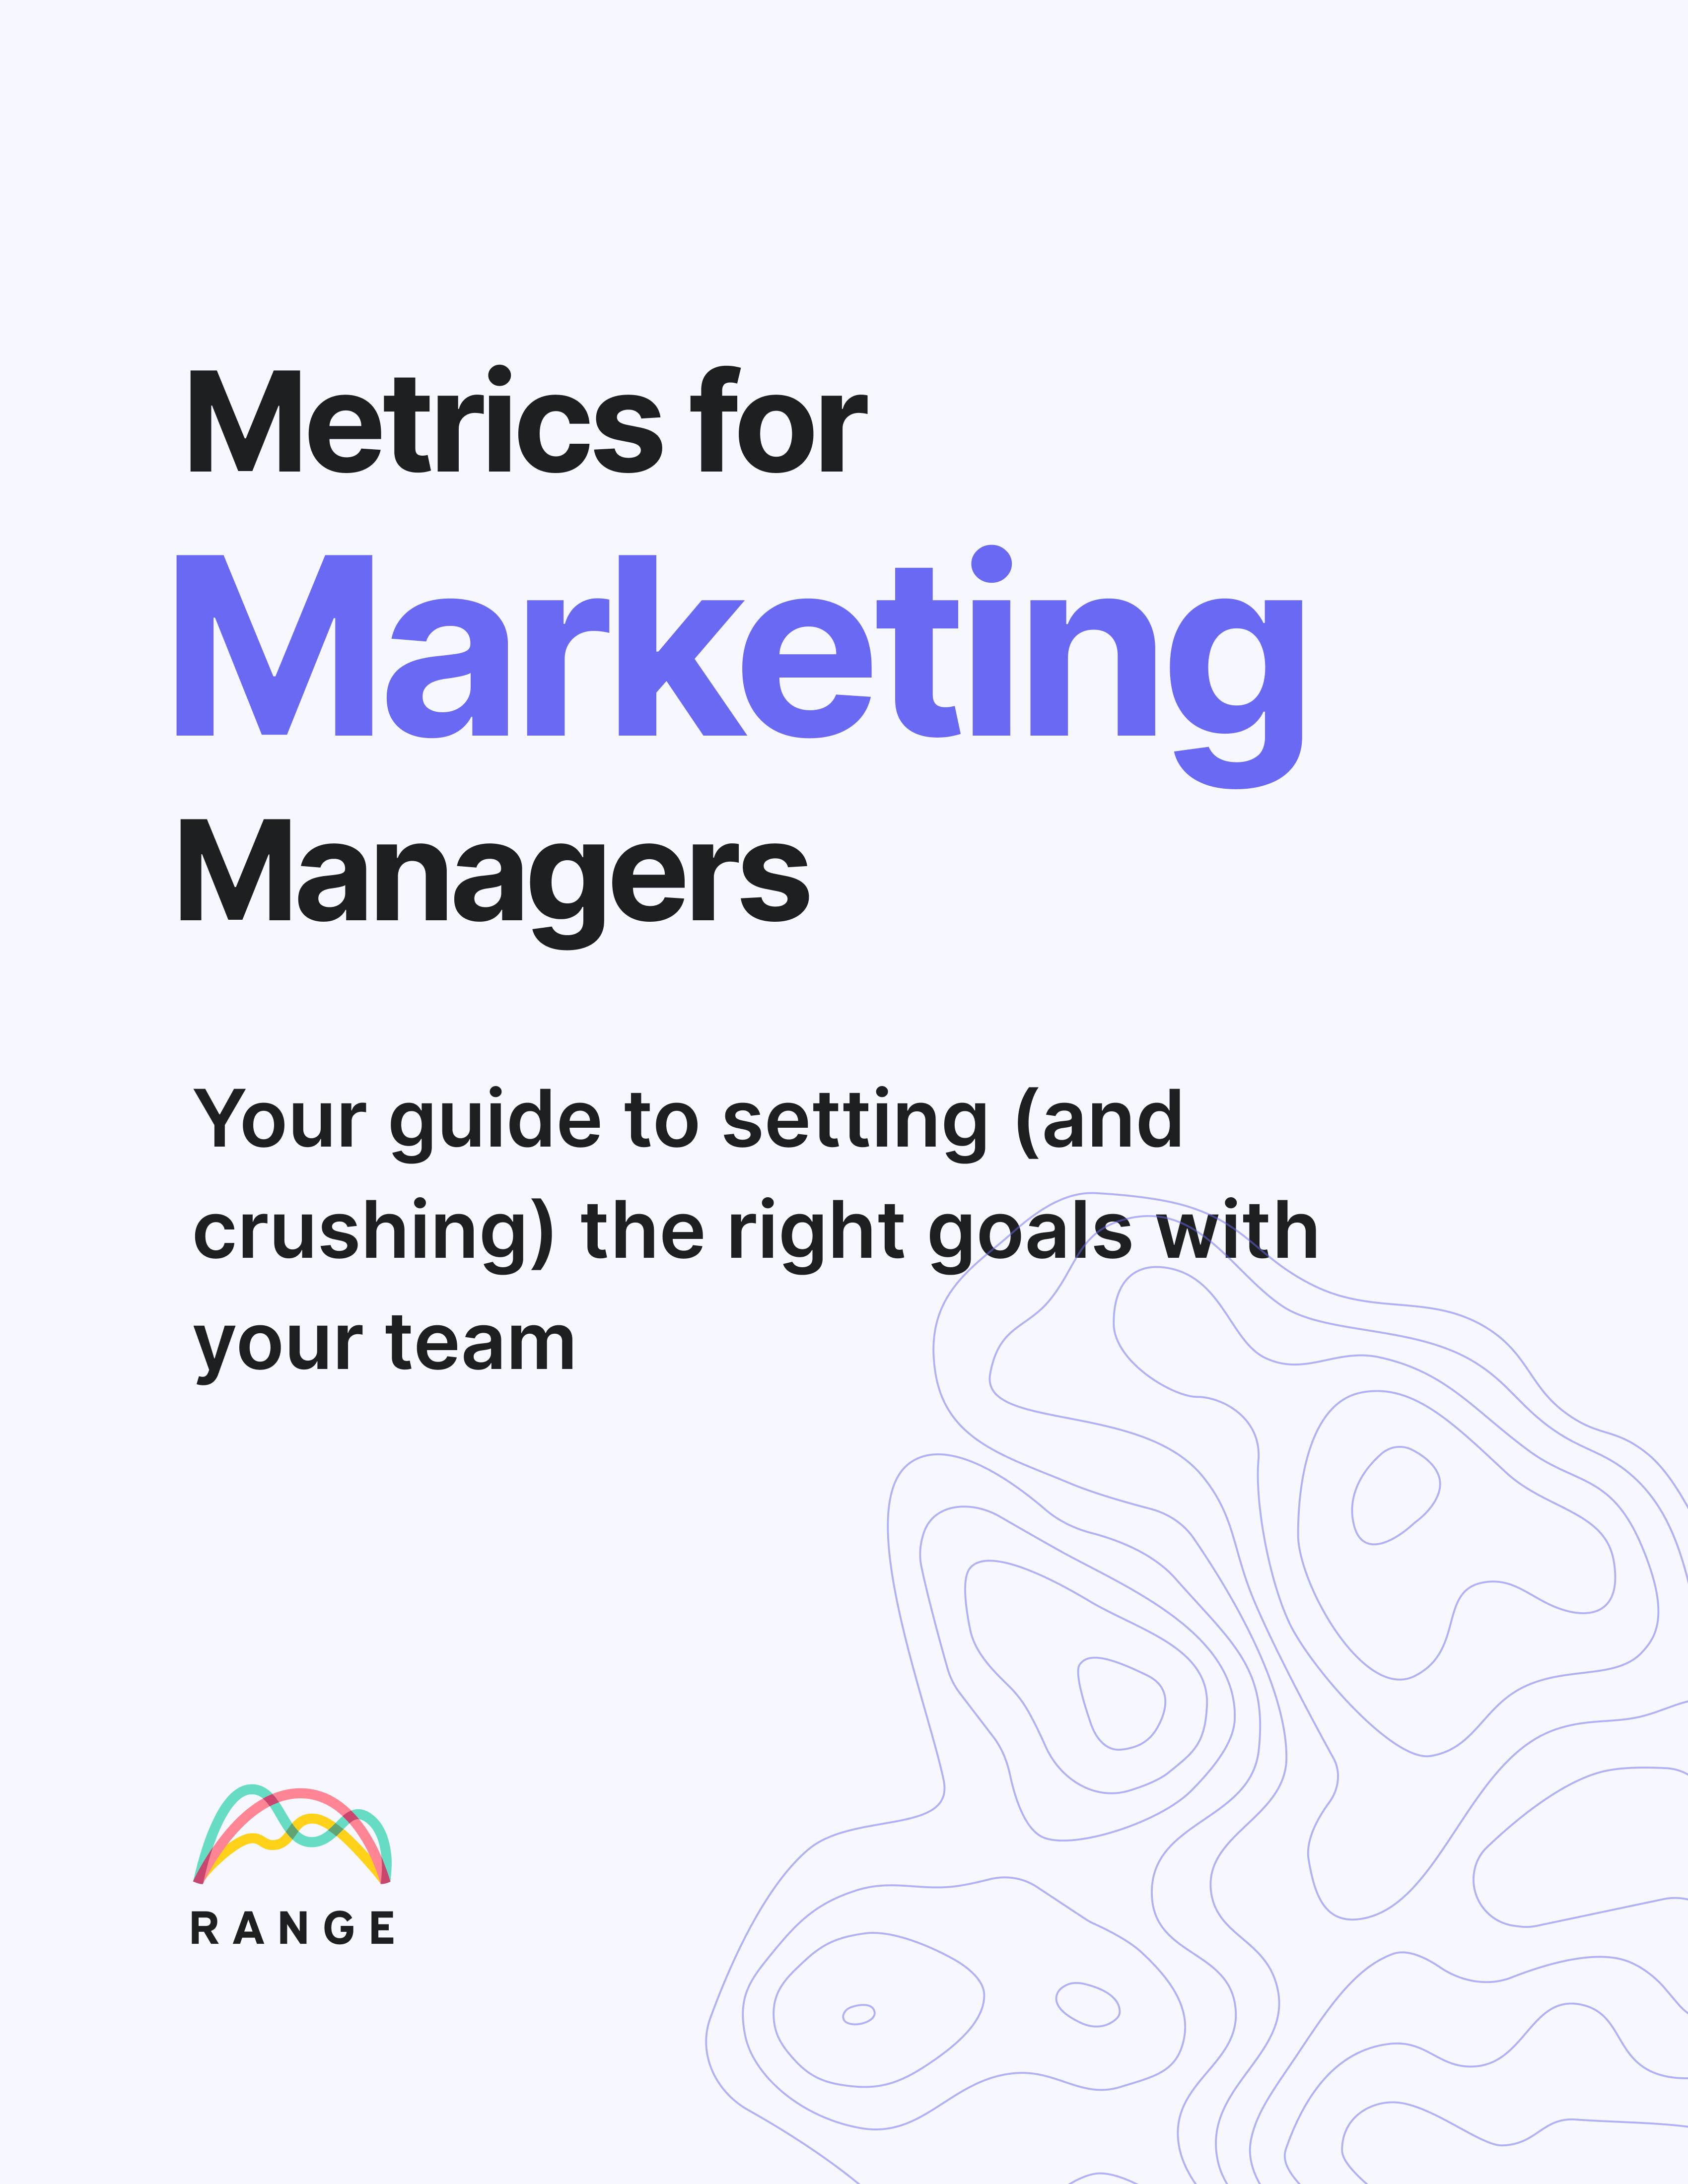 Metrics for Marketing Managers